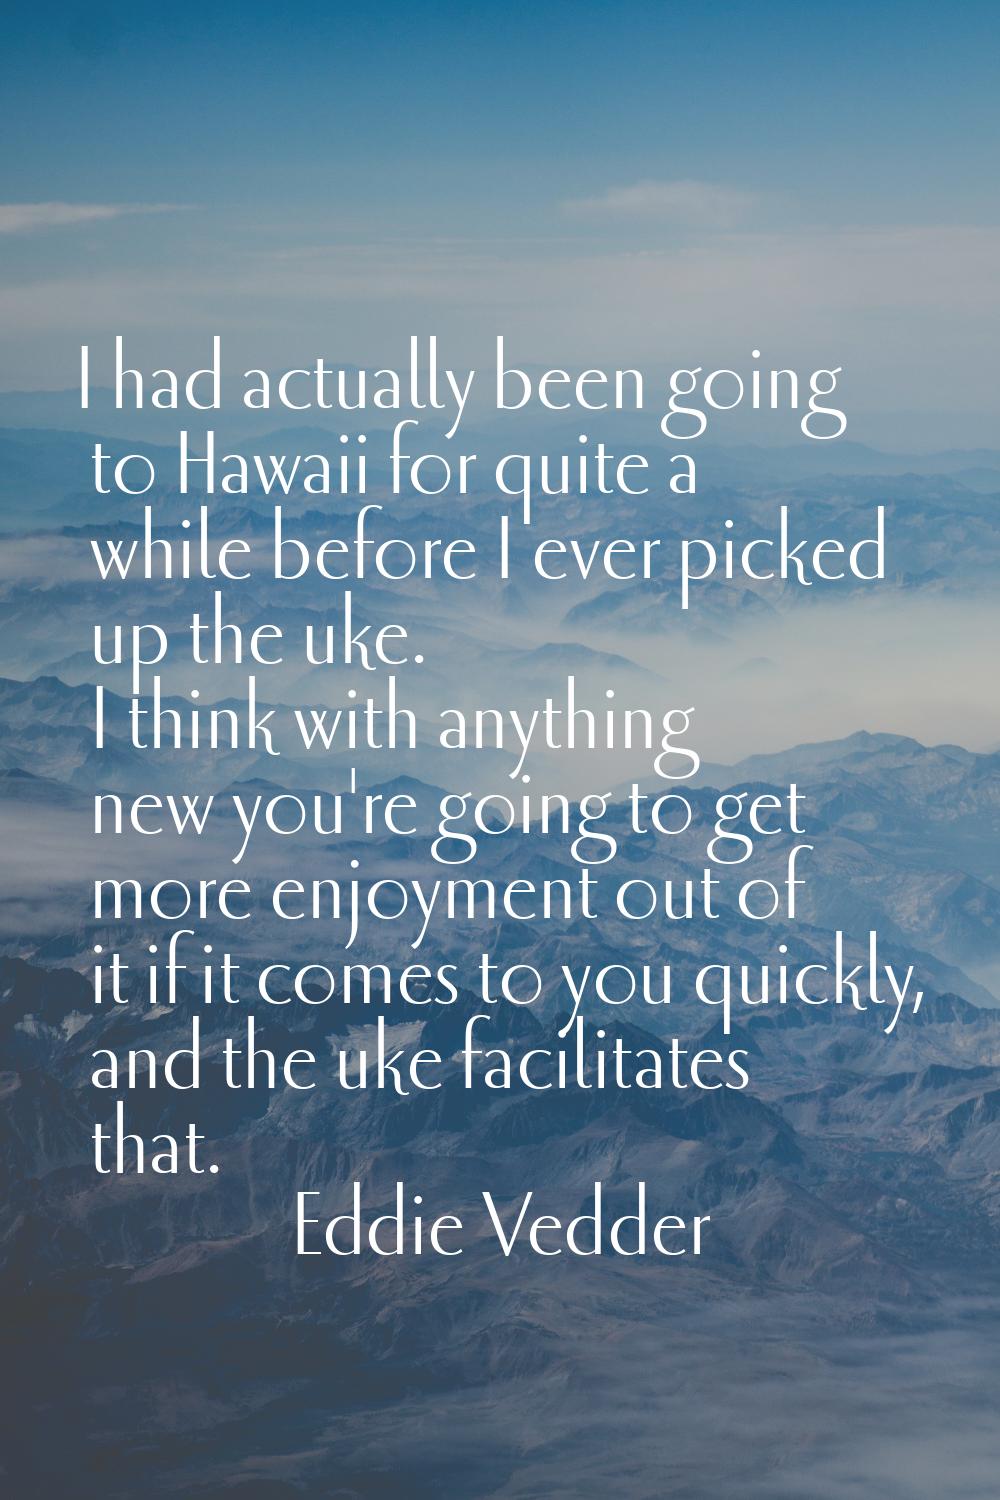 I had actually been going to Hawaii for quite a while before I ever picked up the uke. I think with